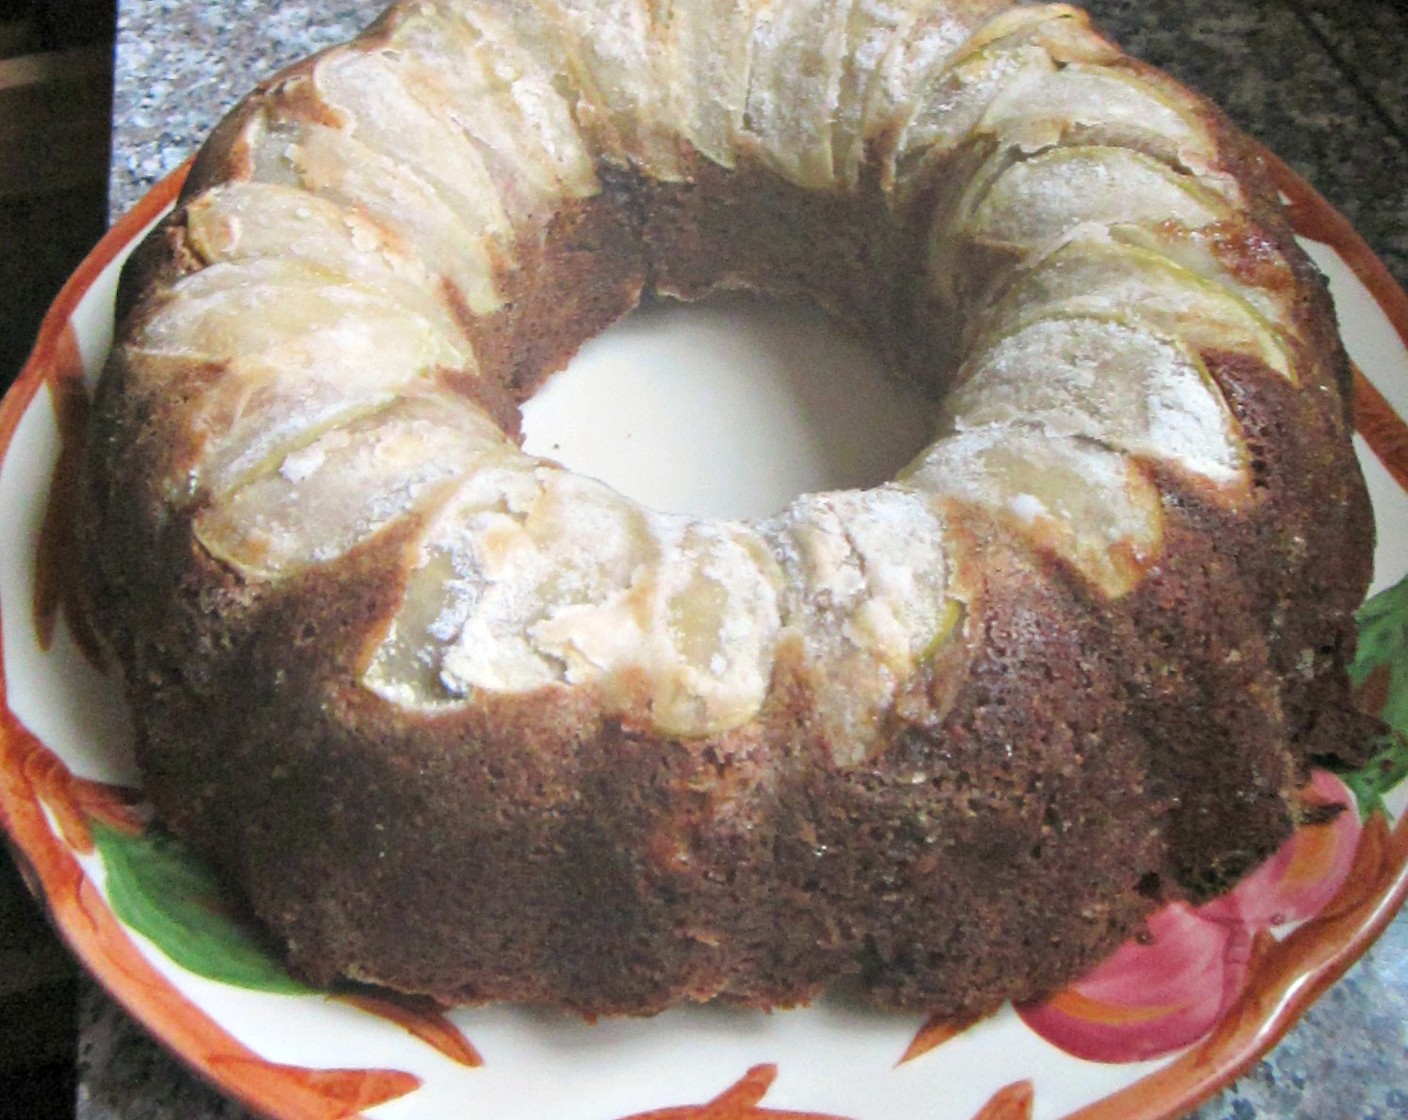 step 15 Once cake is cooked, allow it to cool for 10 minutes. To remove the cake from its pan, place a plate upside down on top of the bundt pan, then, holding the bottom of the bundt pan and the bottom of the plate, invert the pan and plate.